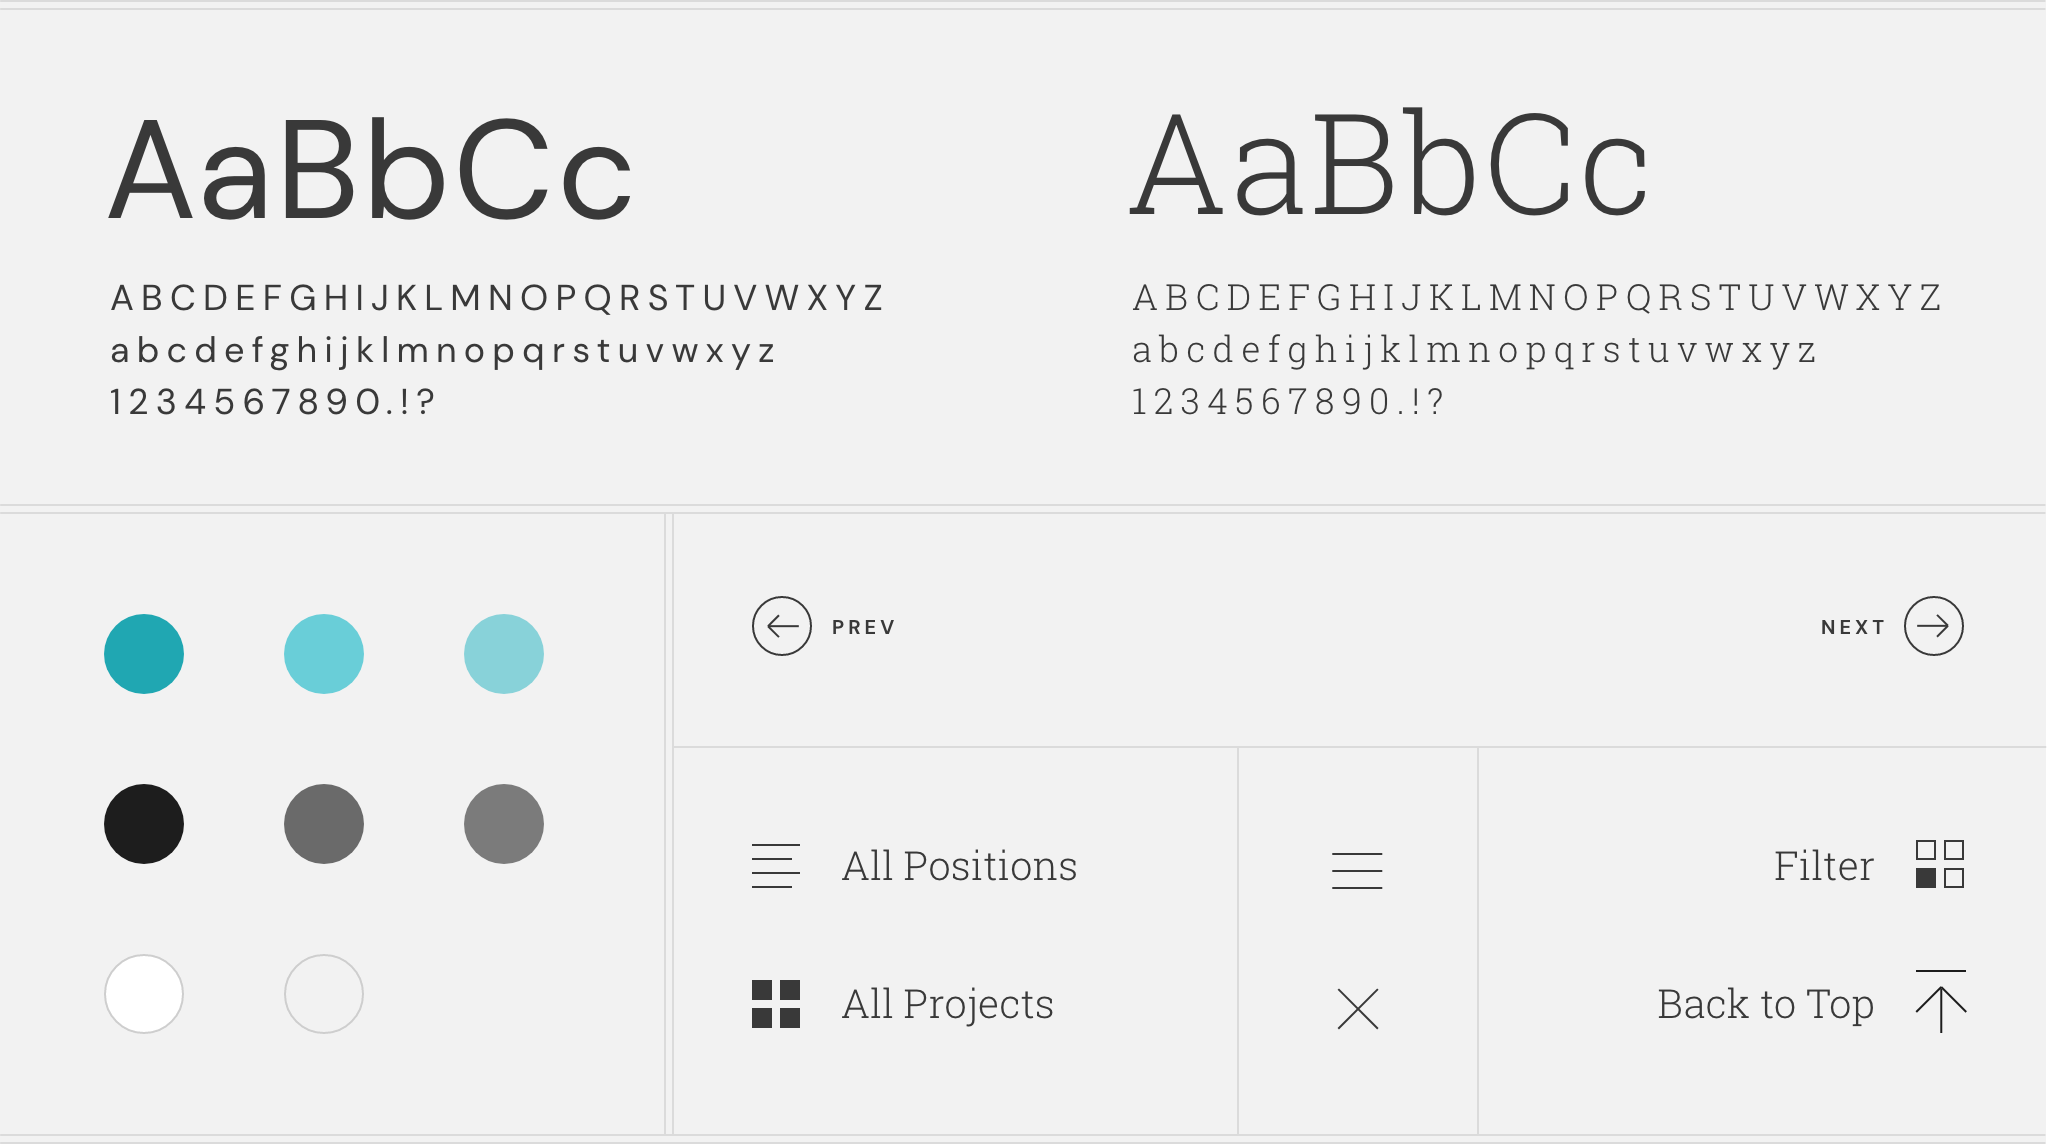 Grid showing website typography, color, and icon systems